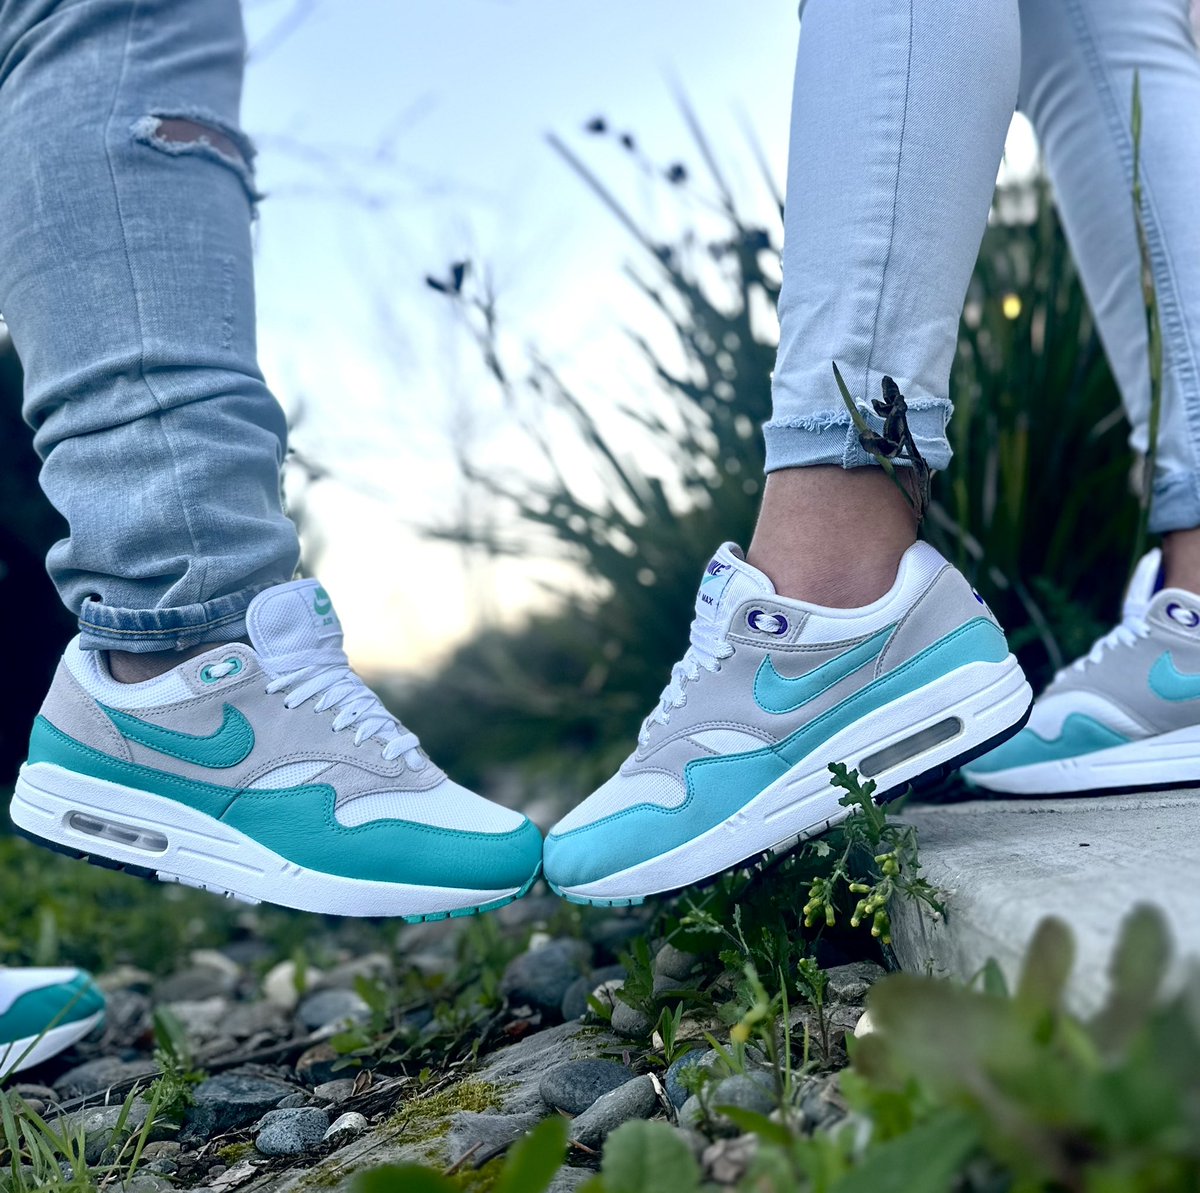 Day 8 of #marchmaxness Me and the wife had to get some twin action in for #airmaxmonth with our aqua Airmax 1s new and OG!🥰😍
#snkrskickcheck
#snkrsliveheatingup
#yoursneakersaredope #mywifebetterthanyours @nikestore #kicksonfire #thesolefirm #stilllaceddifferently